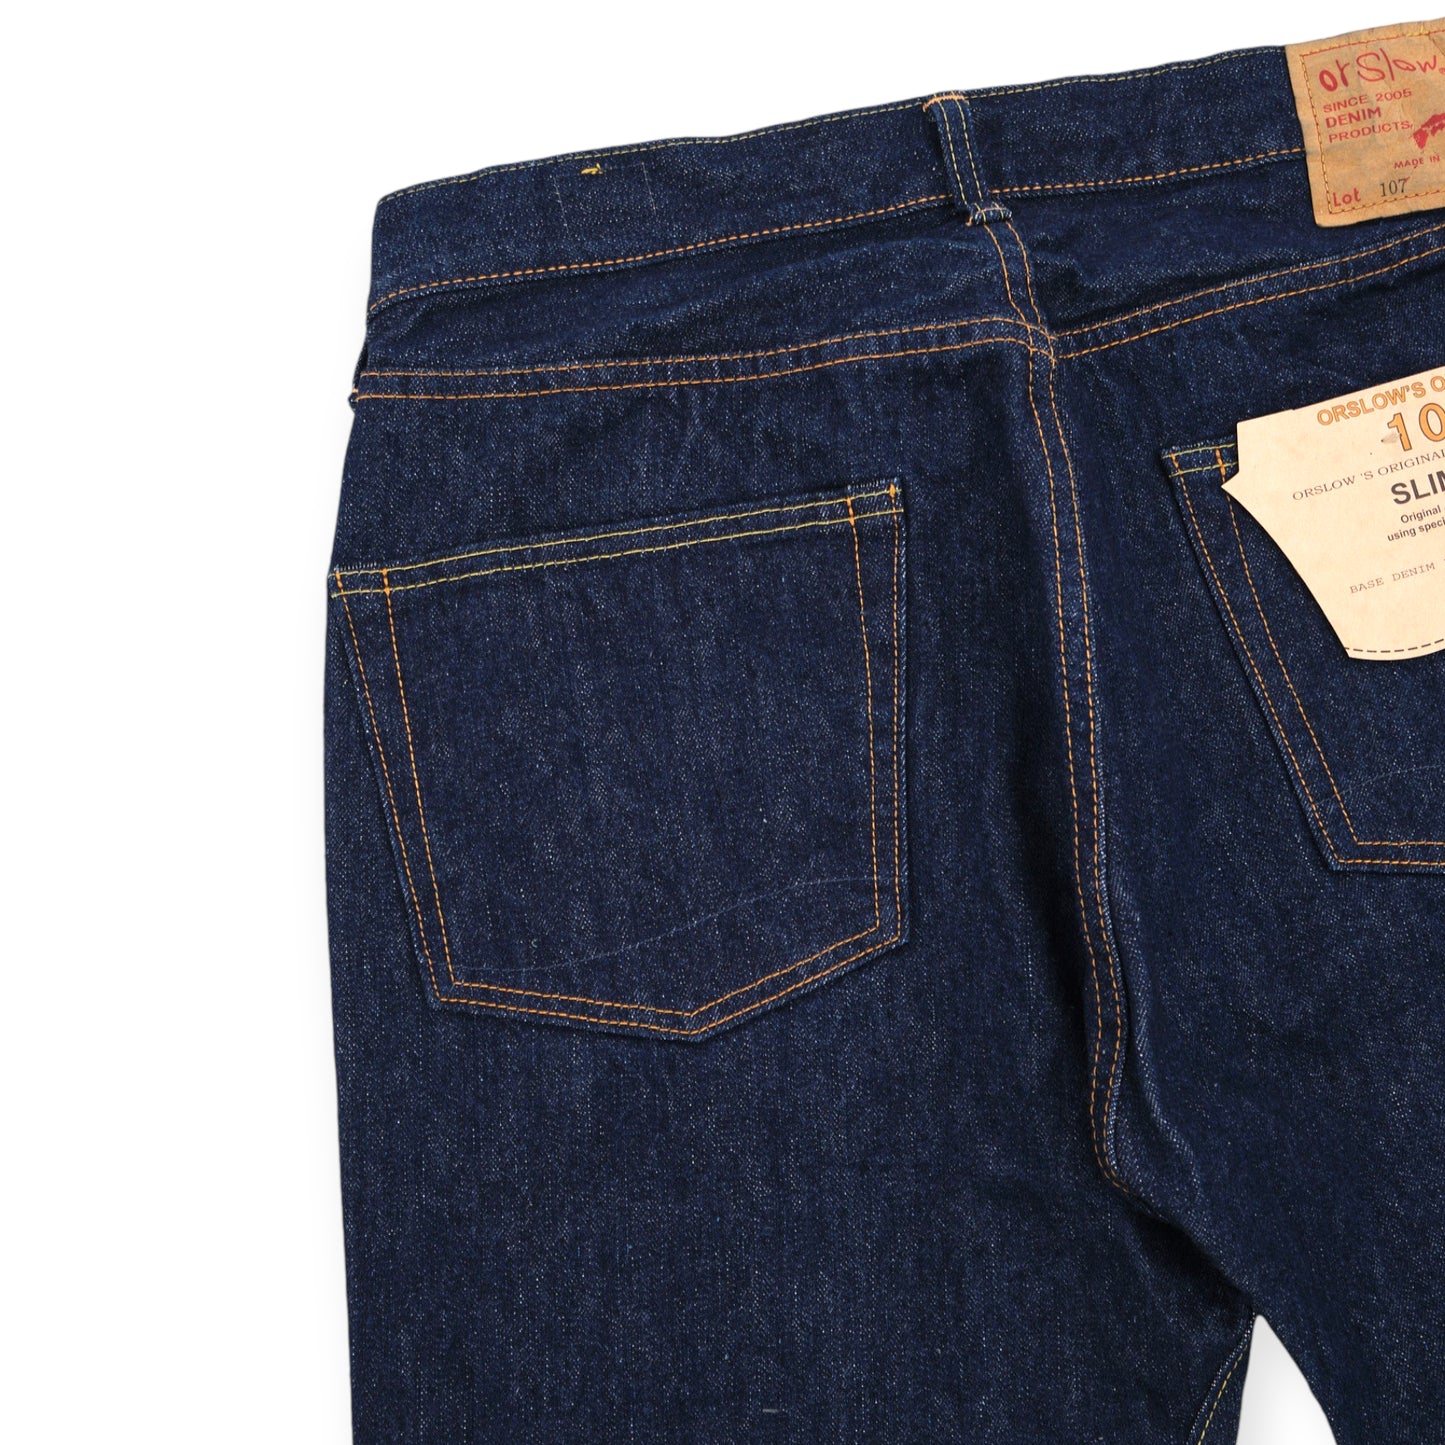 orSlow 107 IVY FIT SELVEDGE JEANS ONE WASH